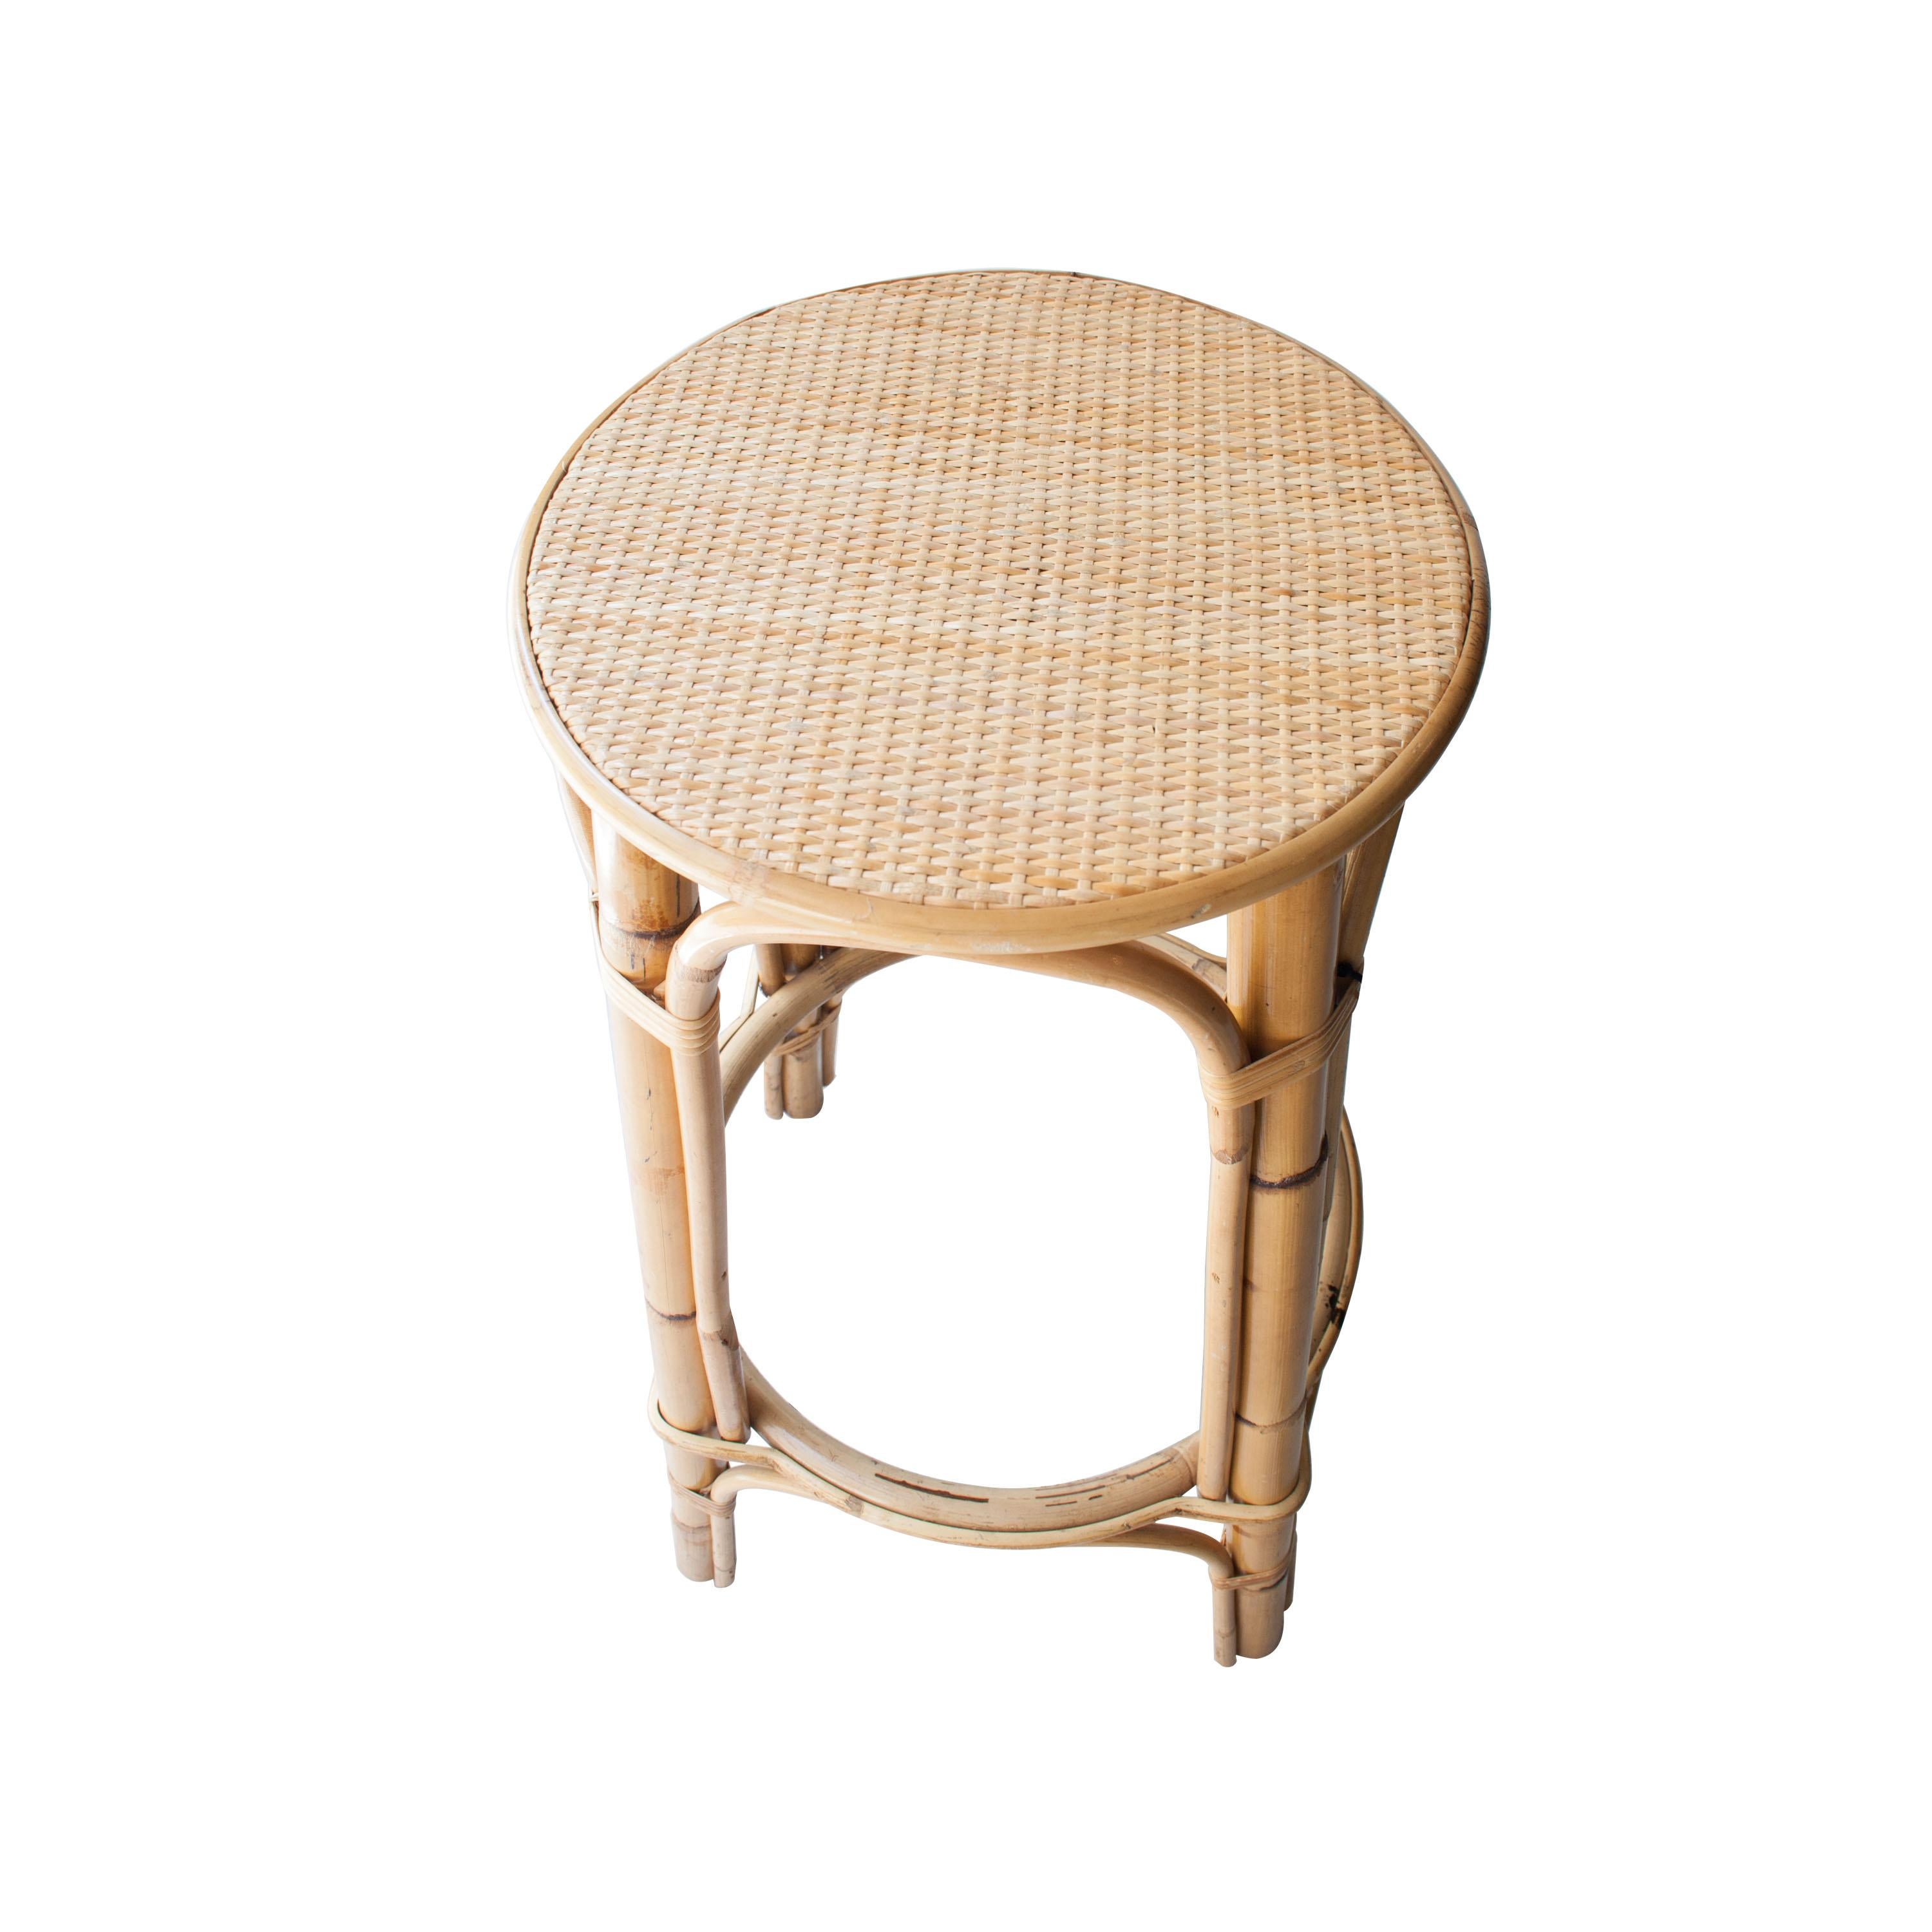 French Mid-Century Modern Bamboo Natural Fiber Stool, France, 1970 For Sale